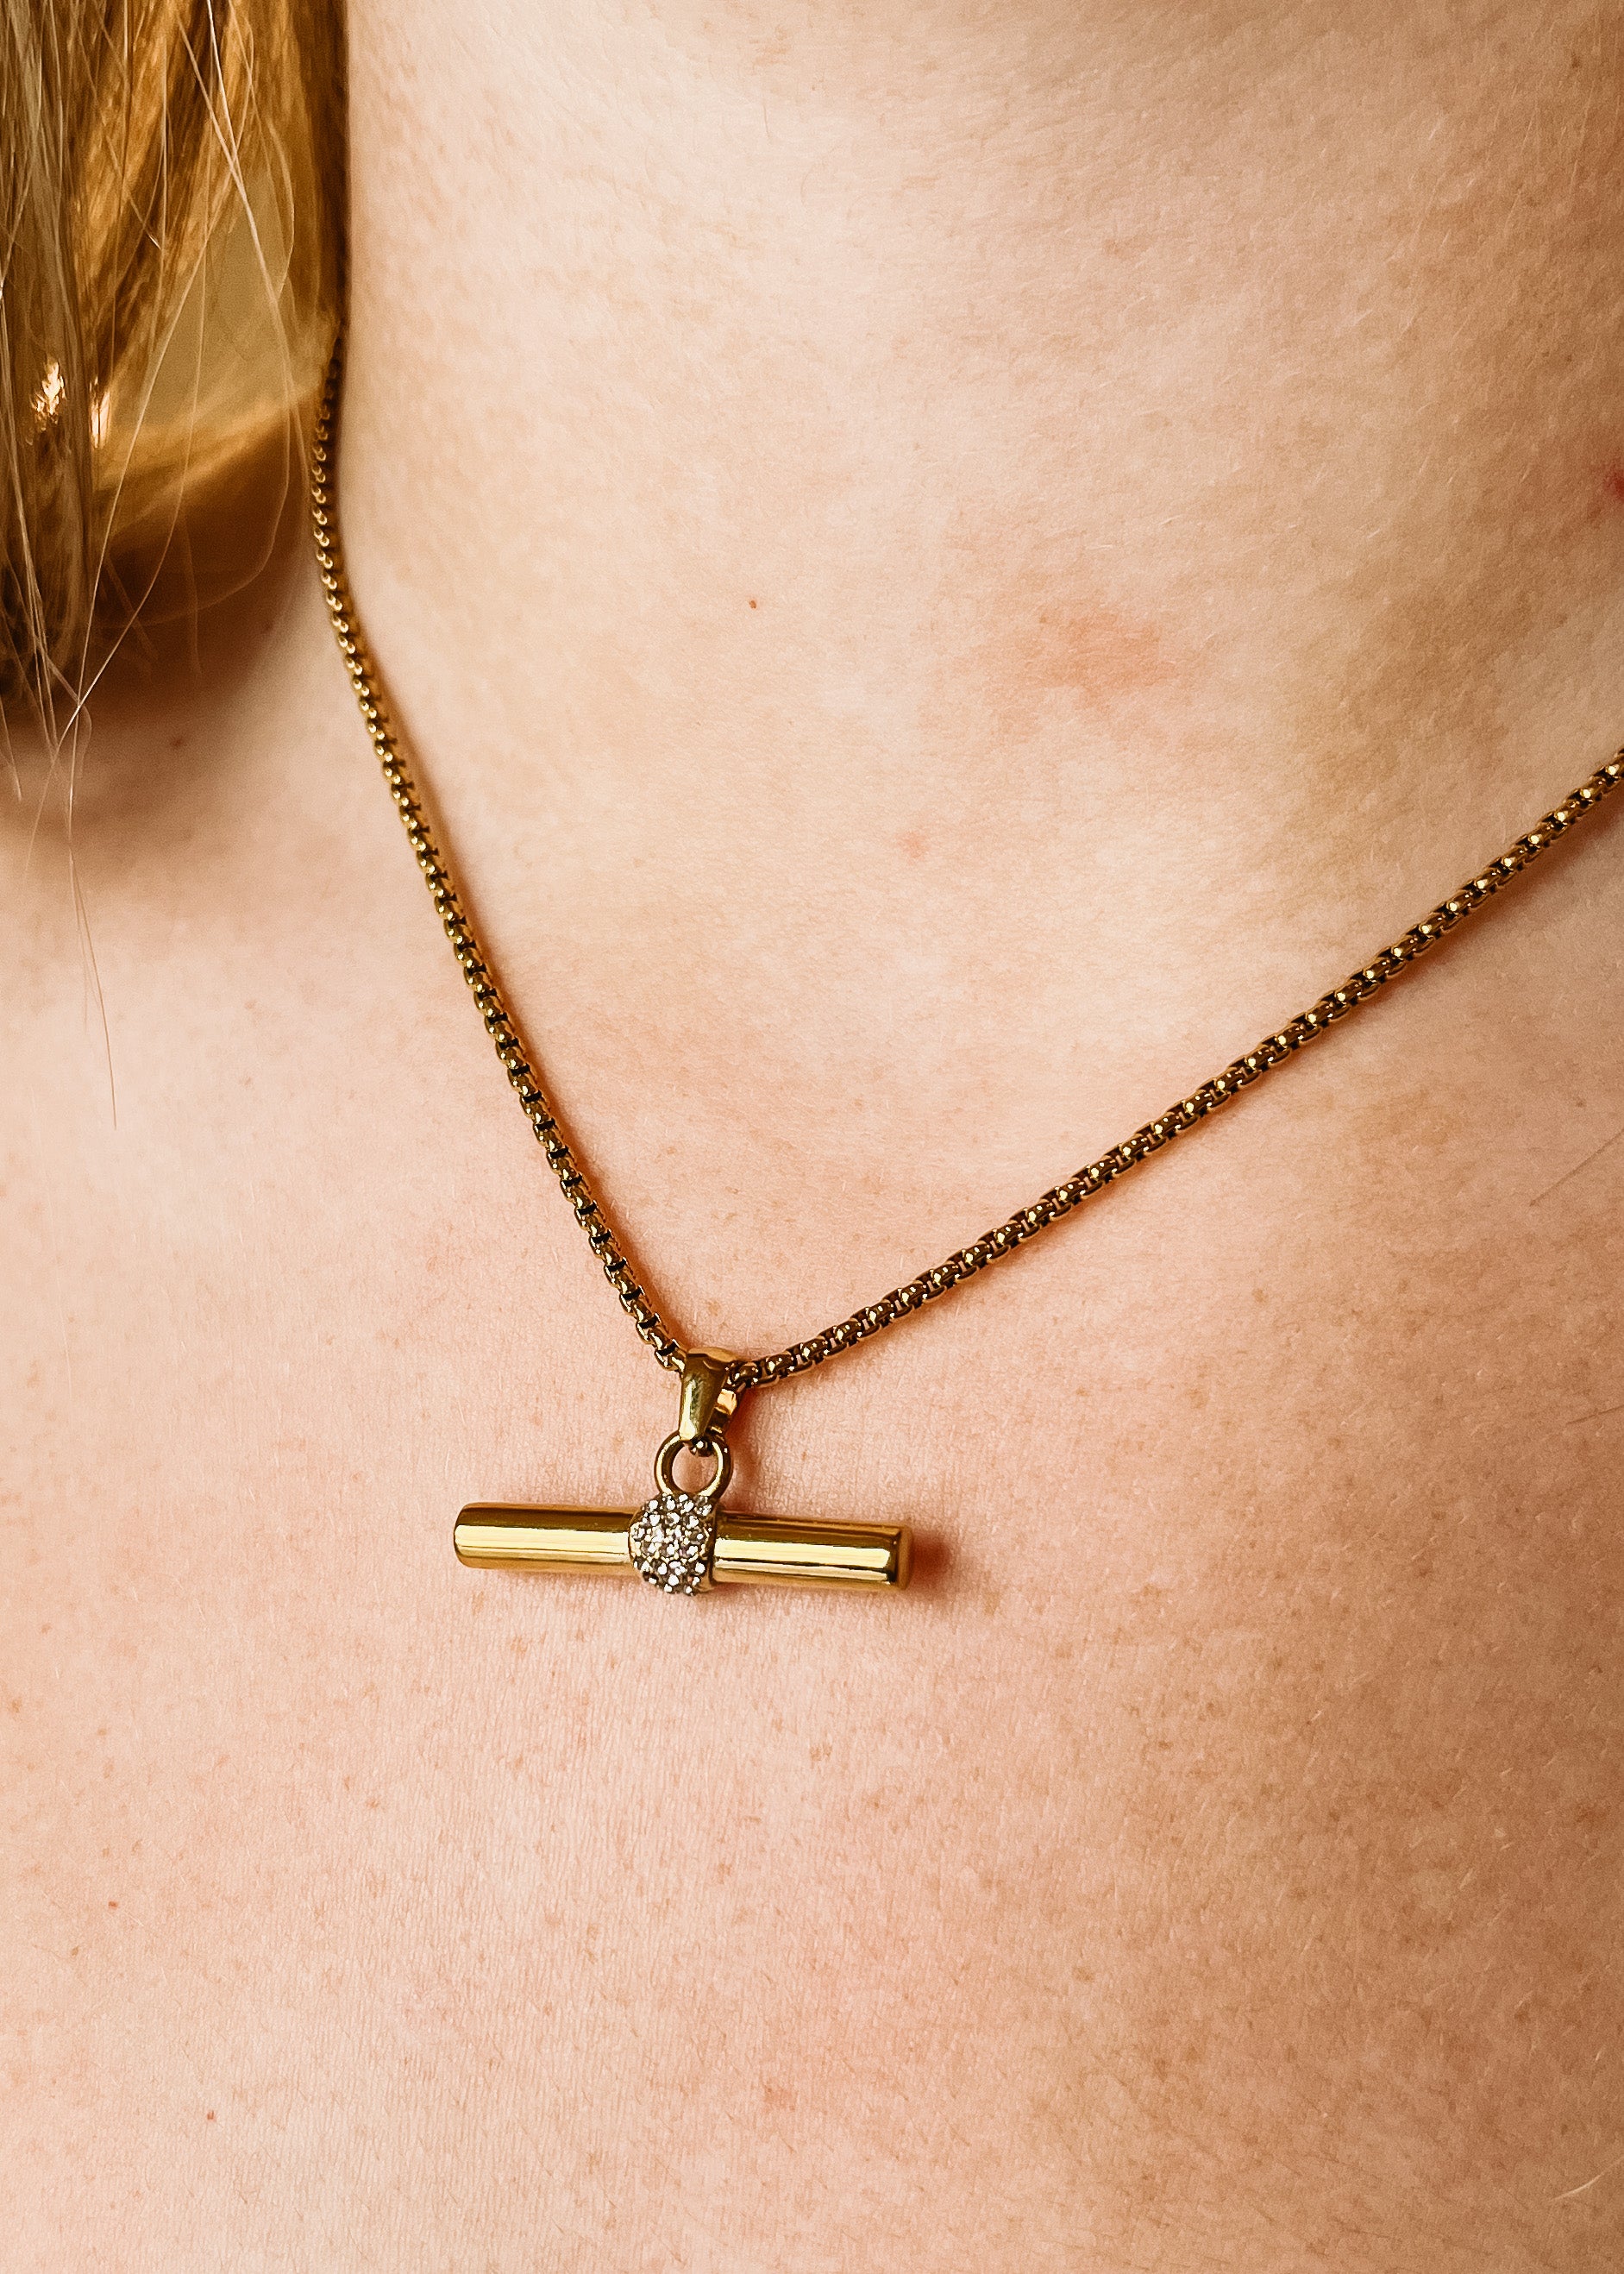 Buy Sterling Silver and Rose Gold Plated Heat T-bar Necklace from the Next  UK online shop